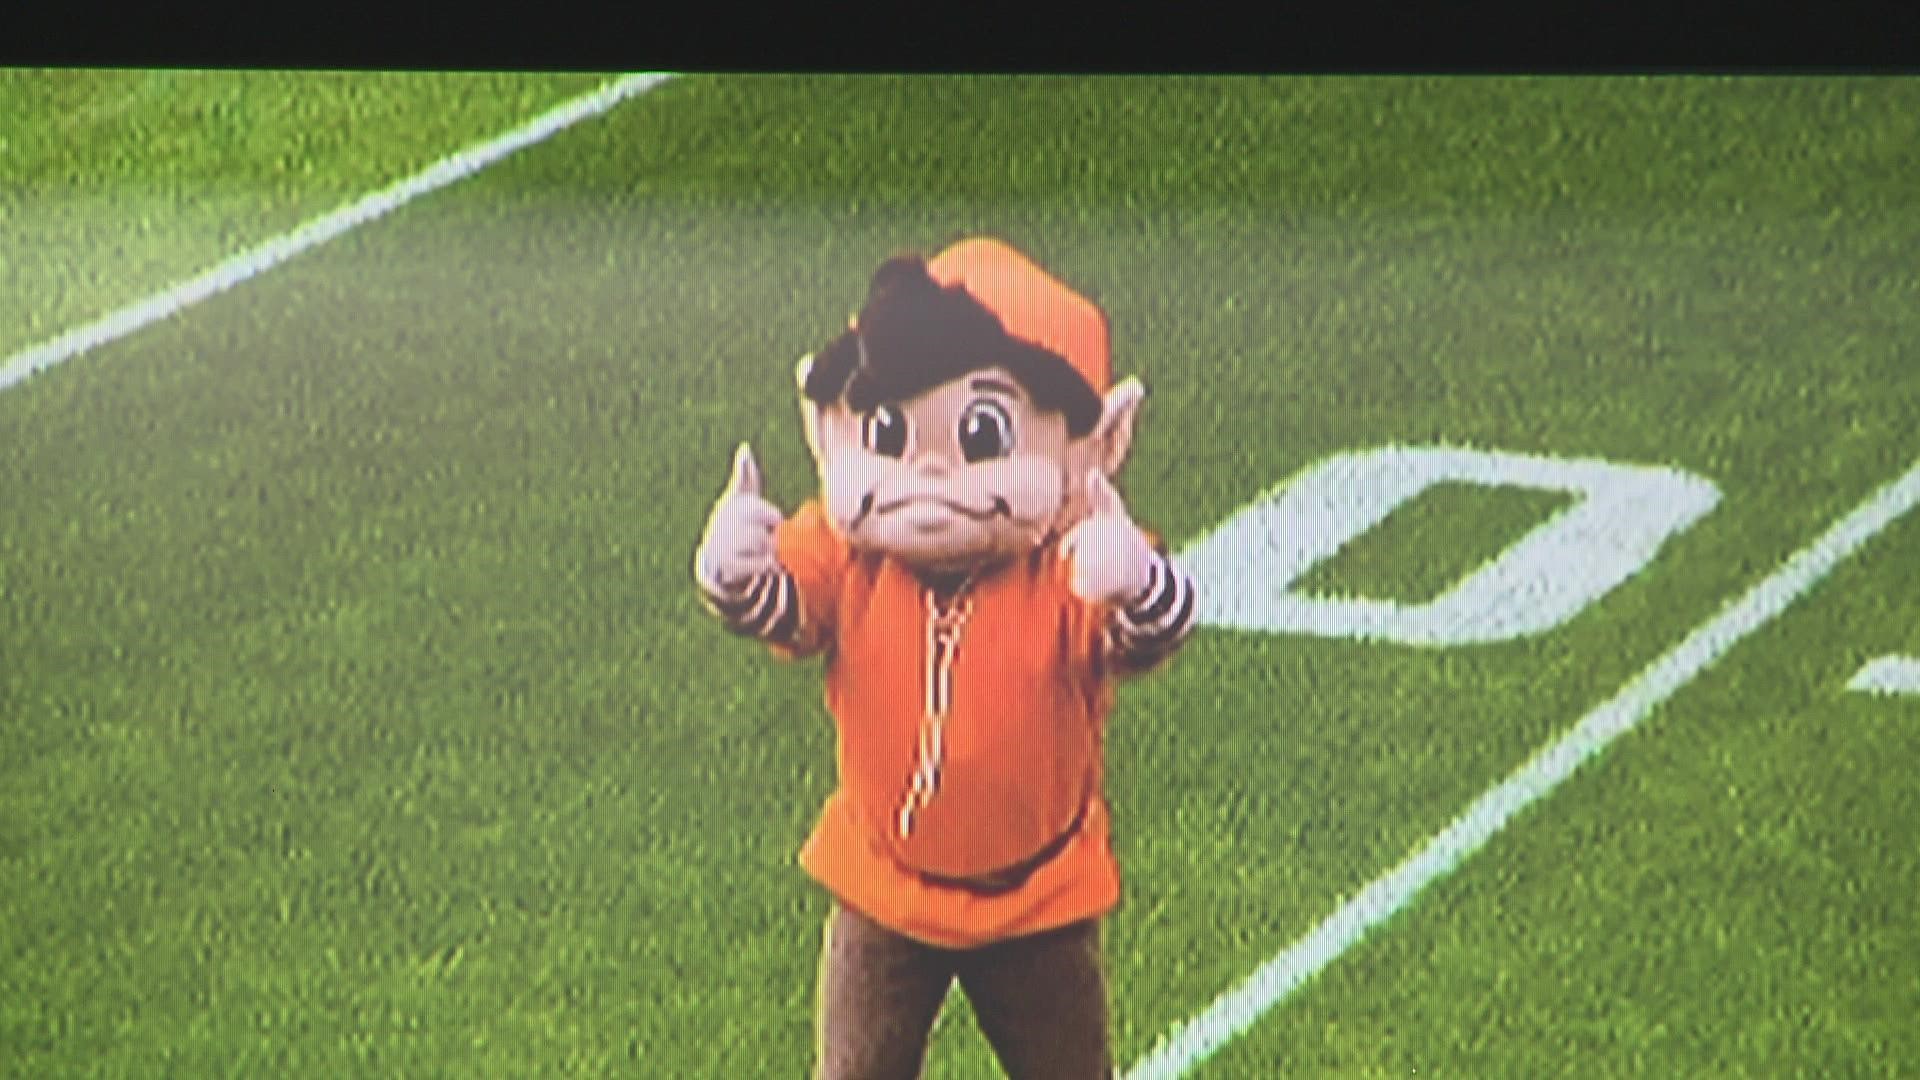 Cleveland Browns fans react to Brownie the Elf midfield logo